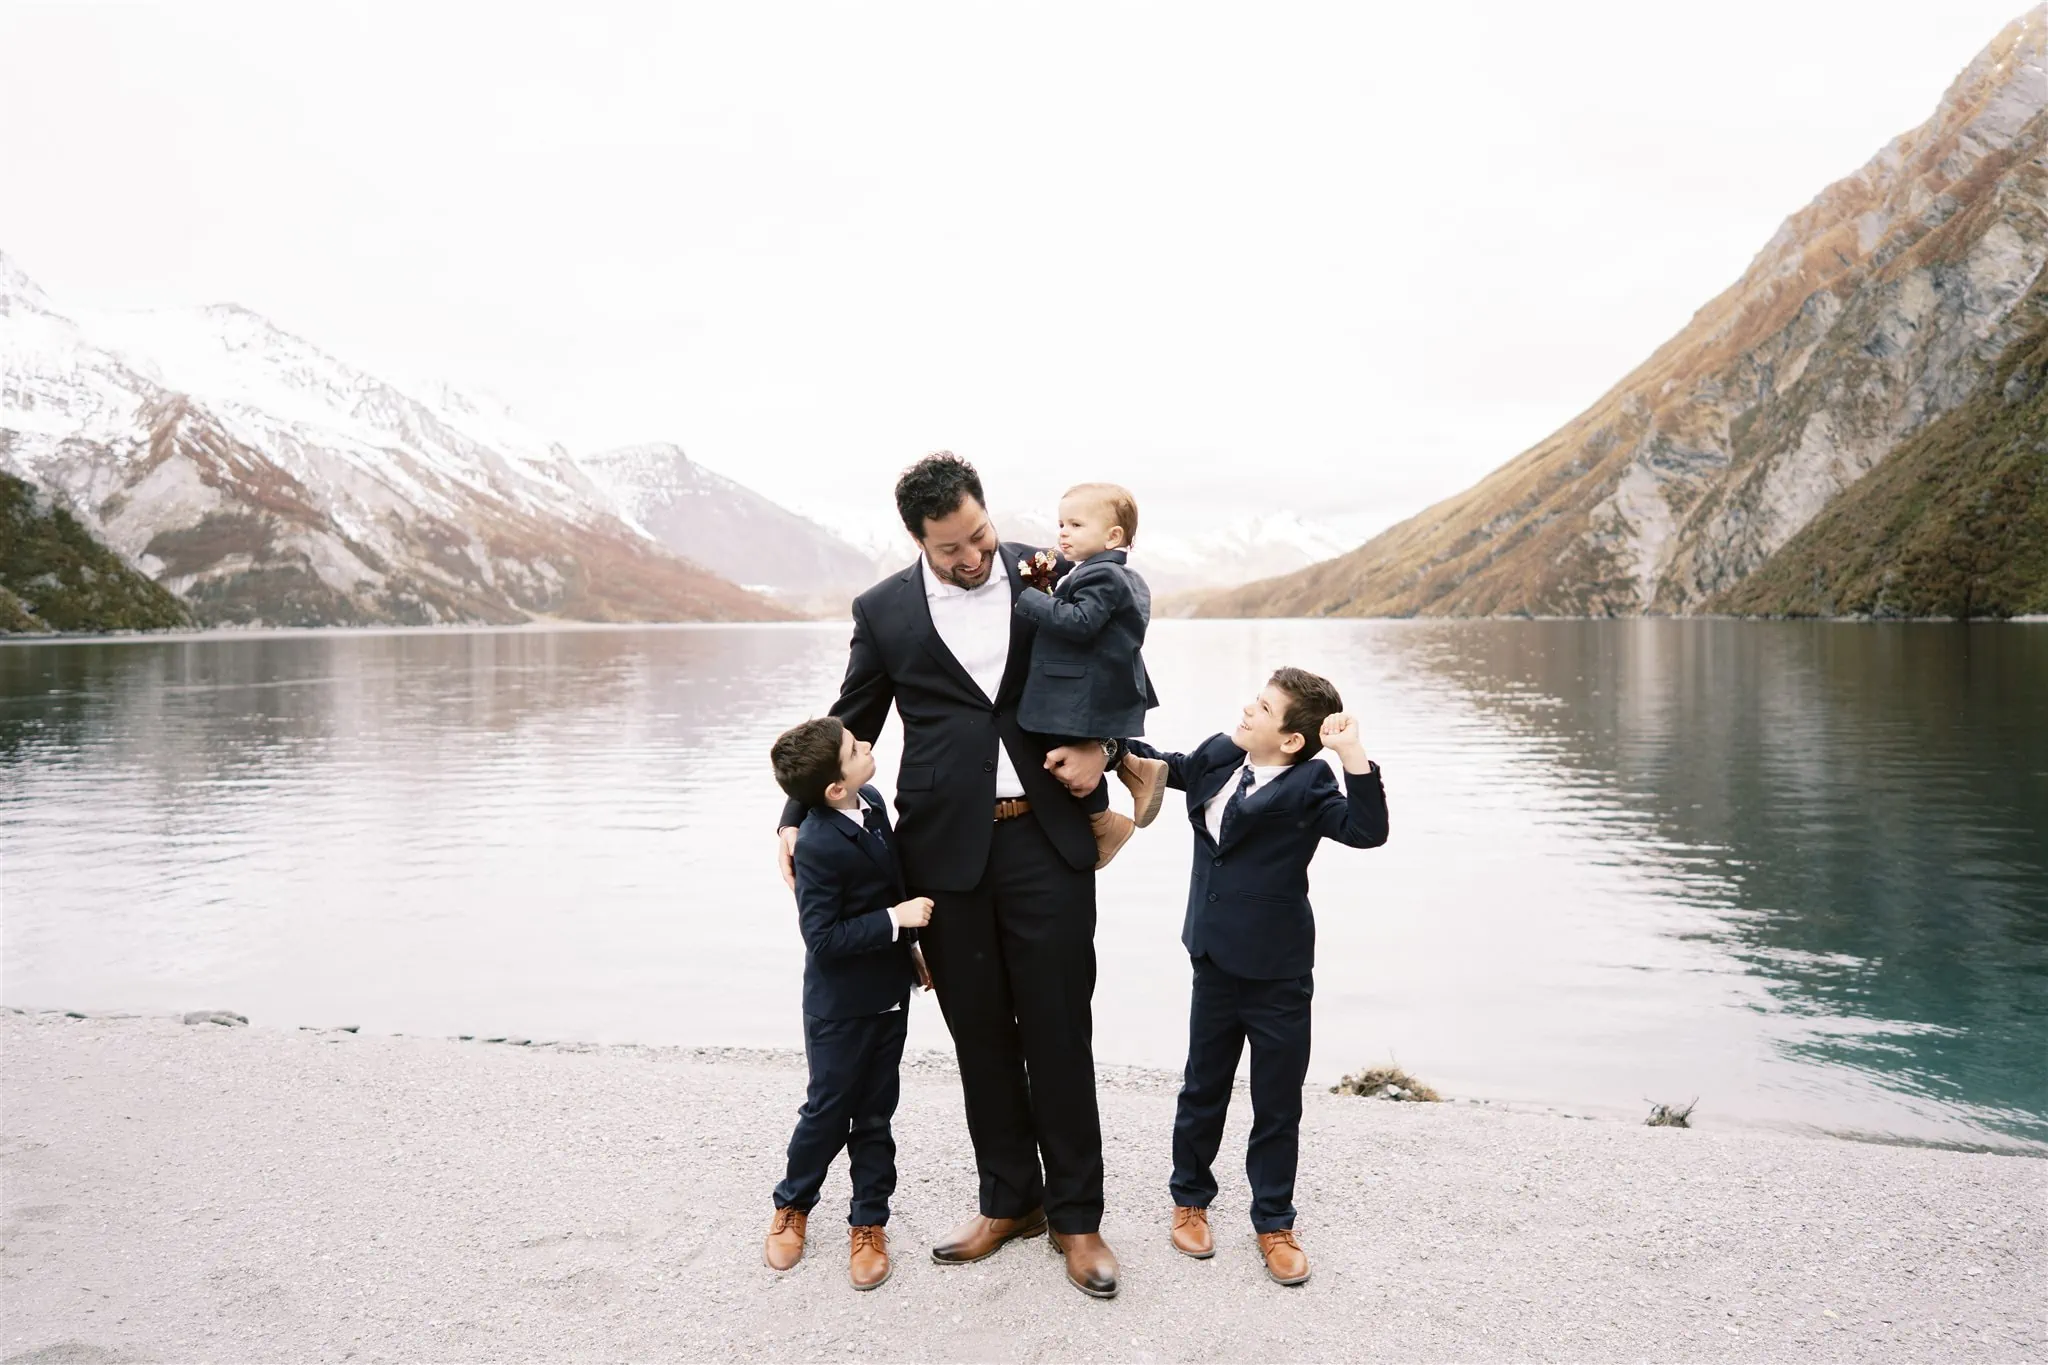 Queenstown New Zealand Elopement Wedding Photographer - Alex, a man in a suit, holds his two sons Shahar in front of a lake in New Zealand.